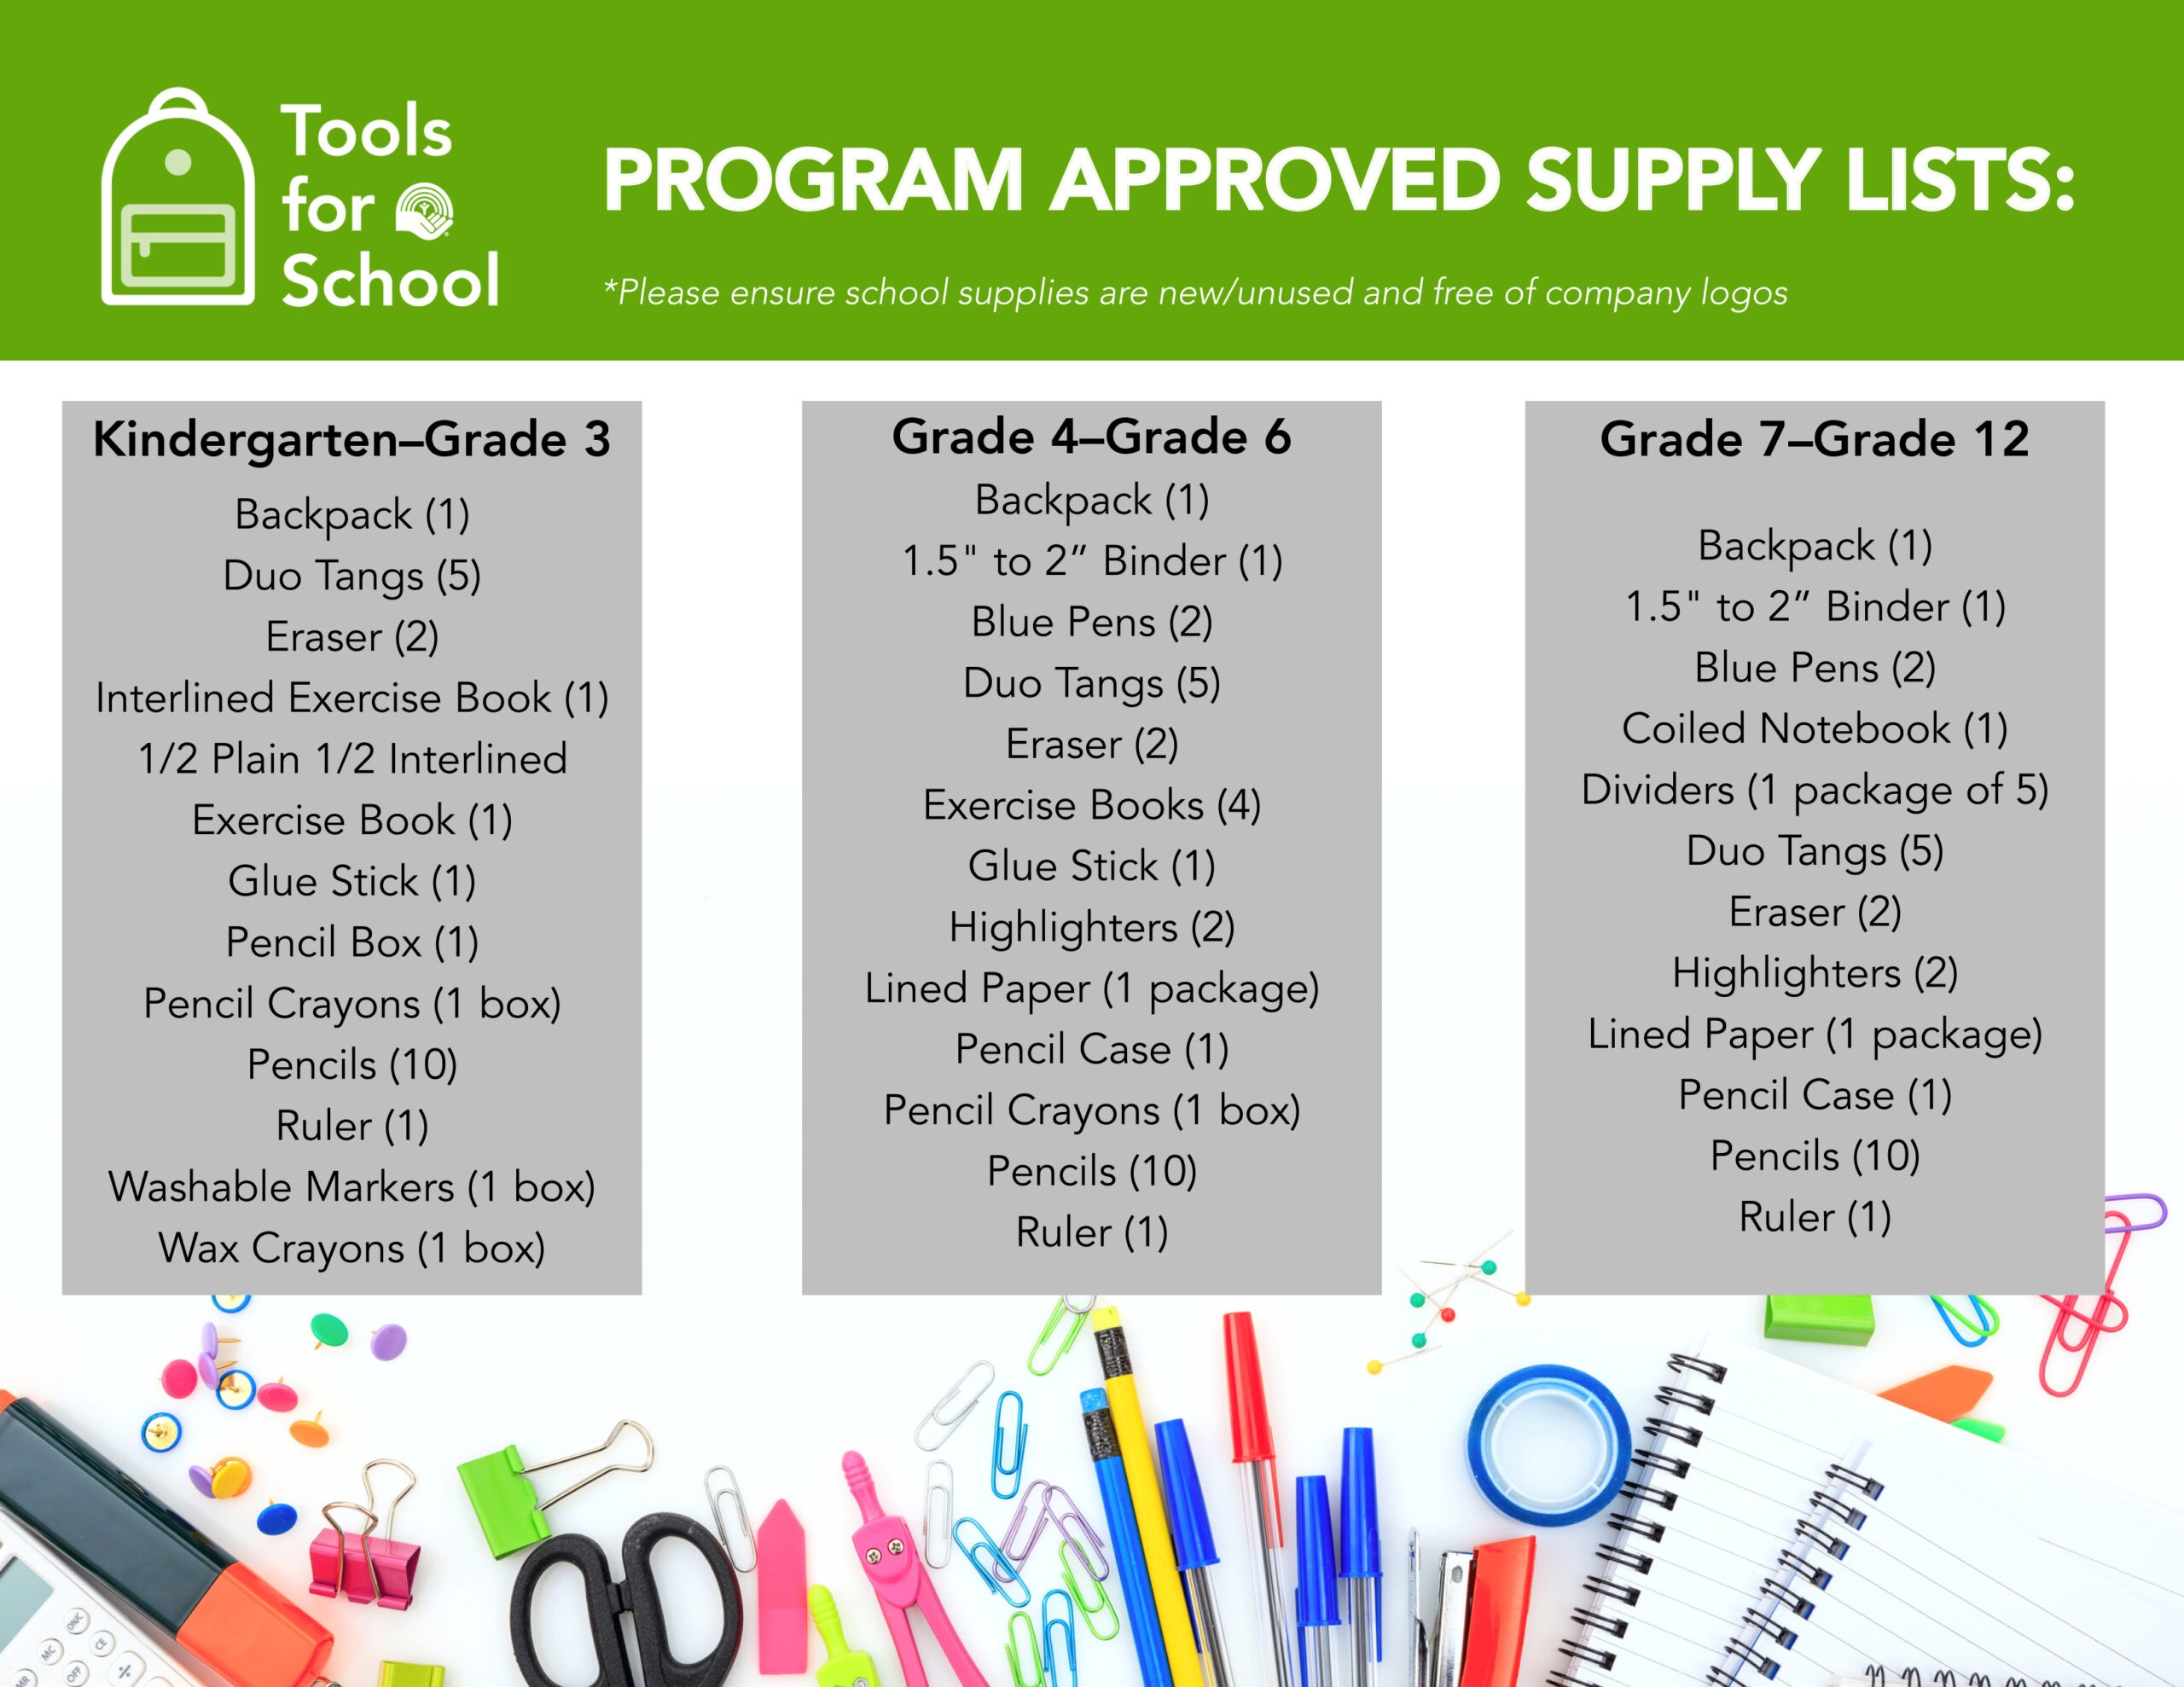 Tools for School Londonderry Mall